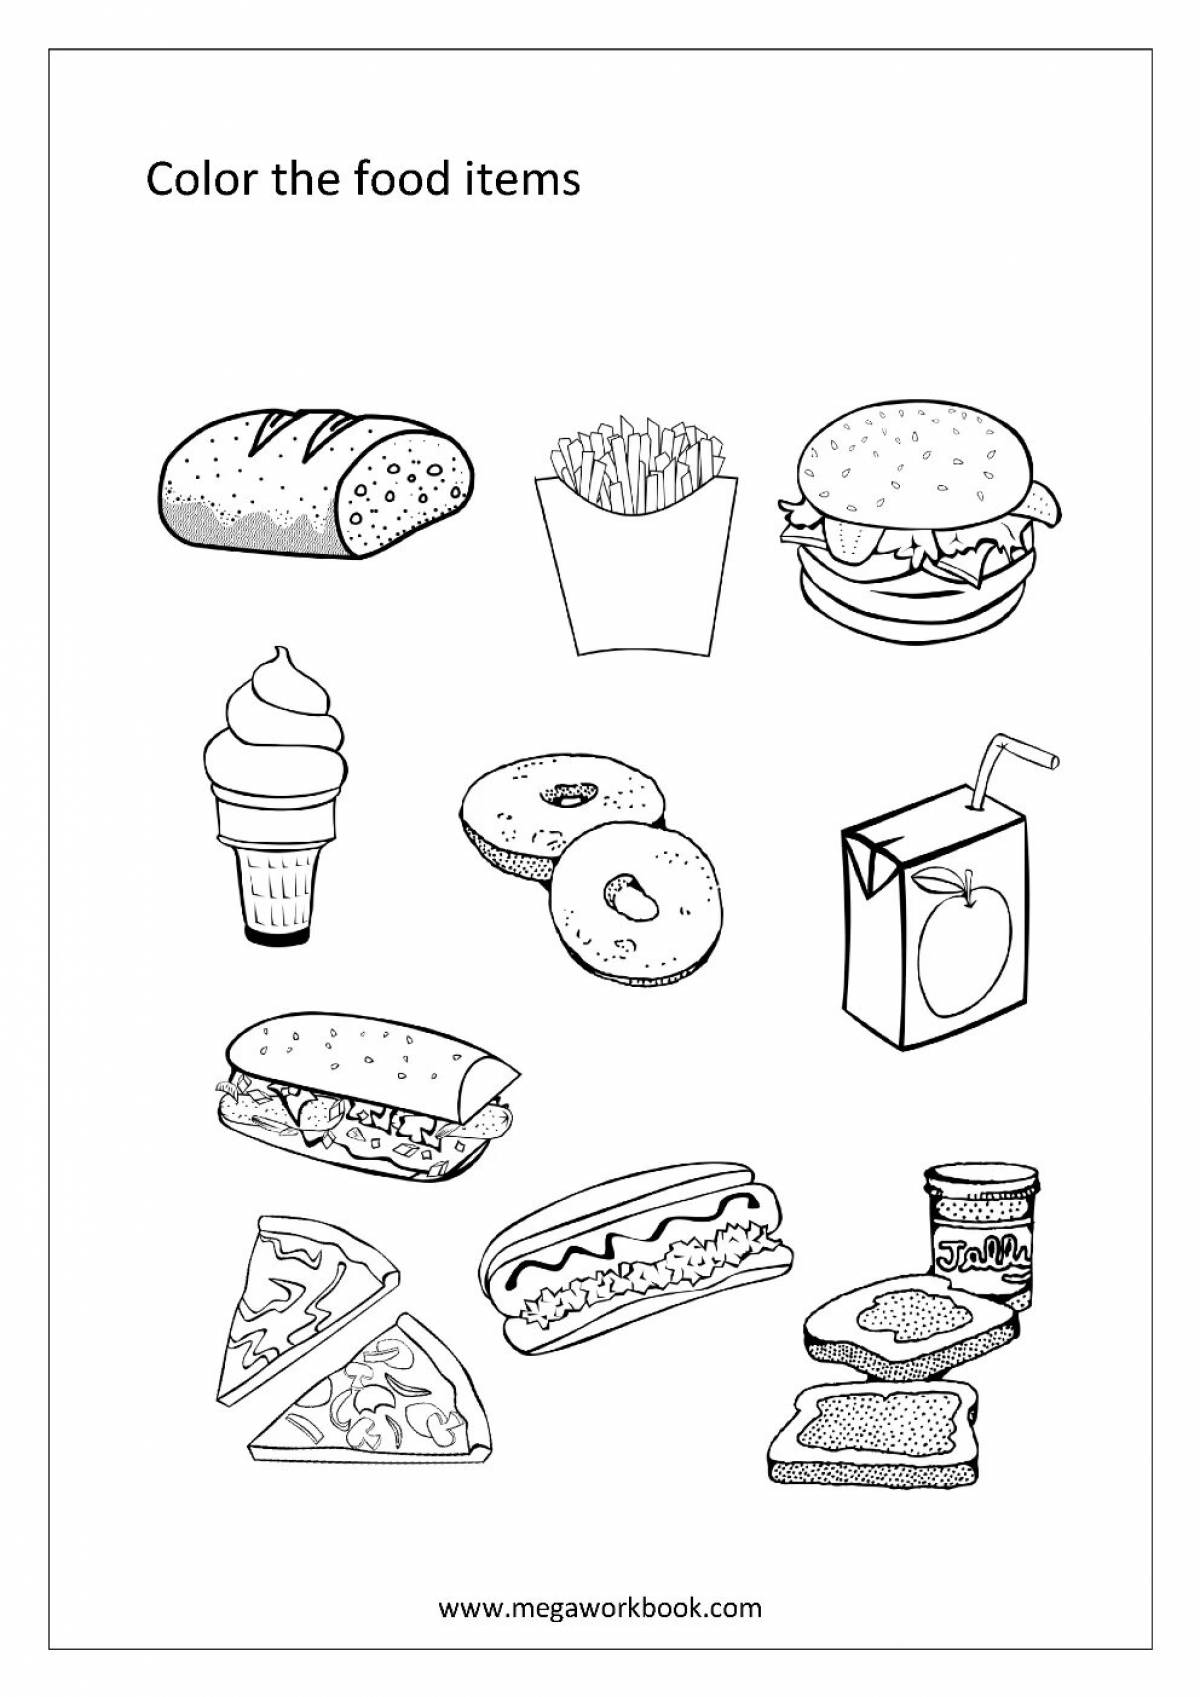 Invitingly coloring the food page